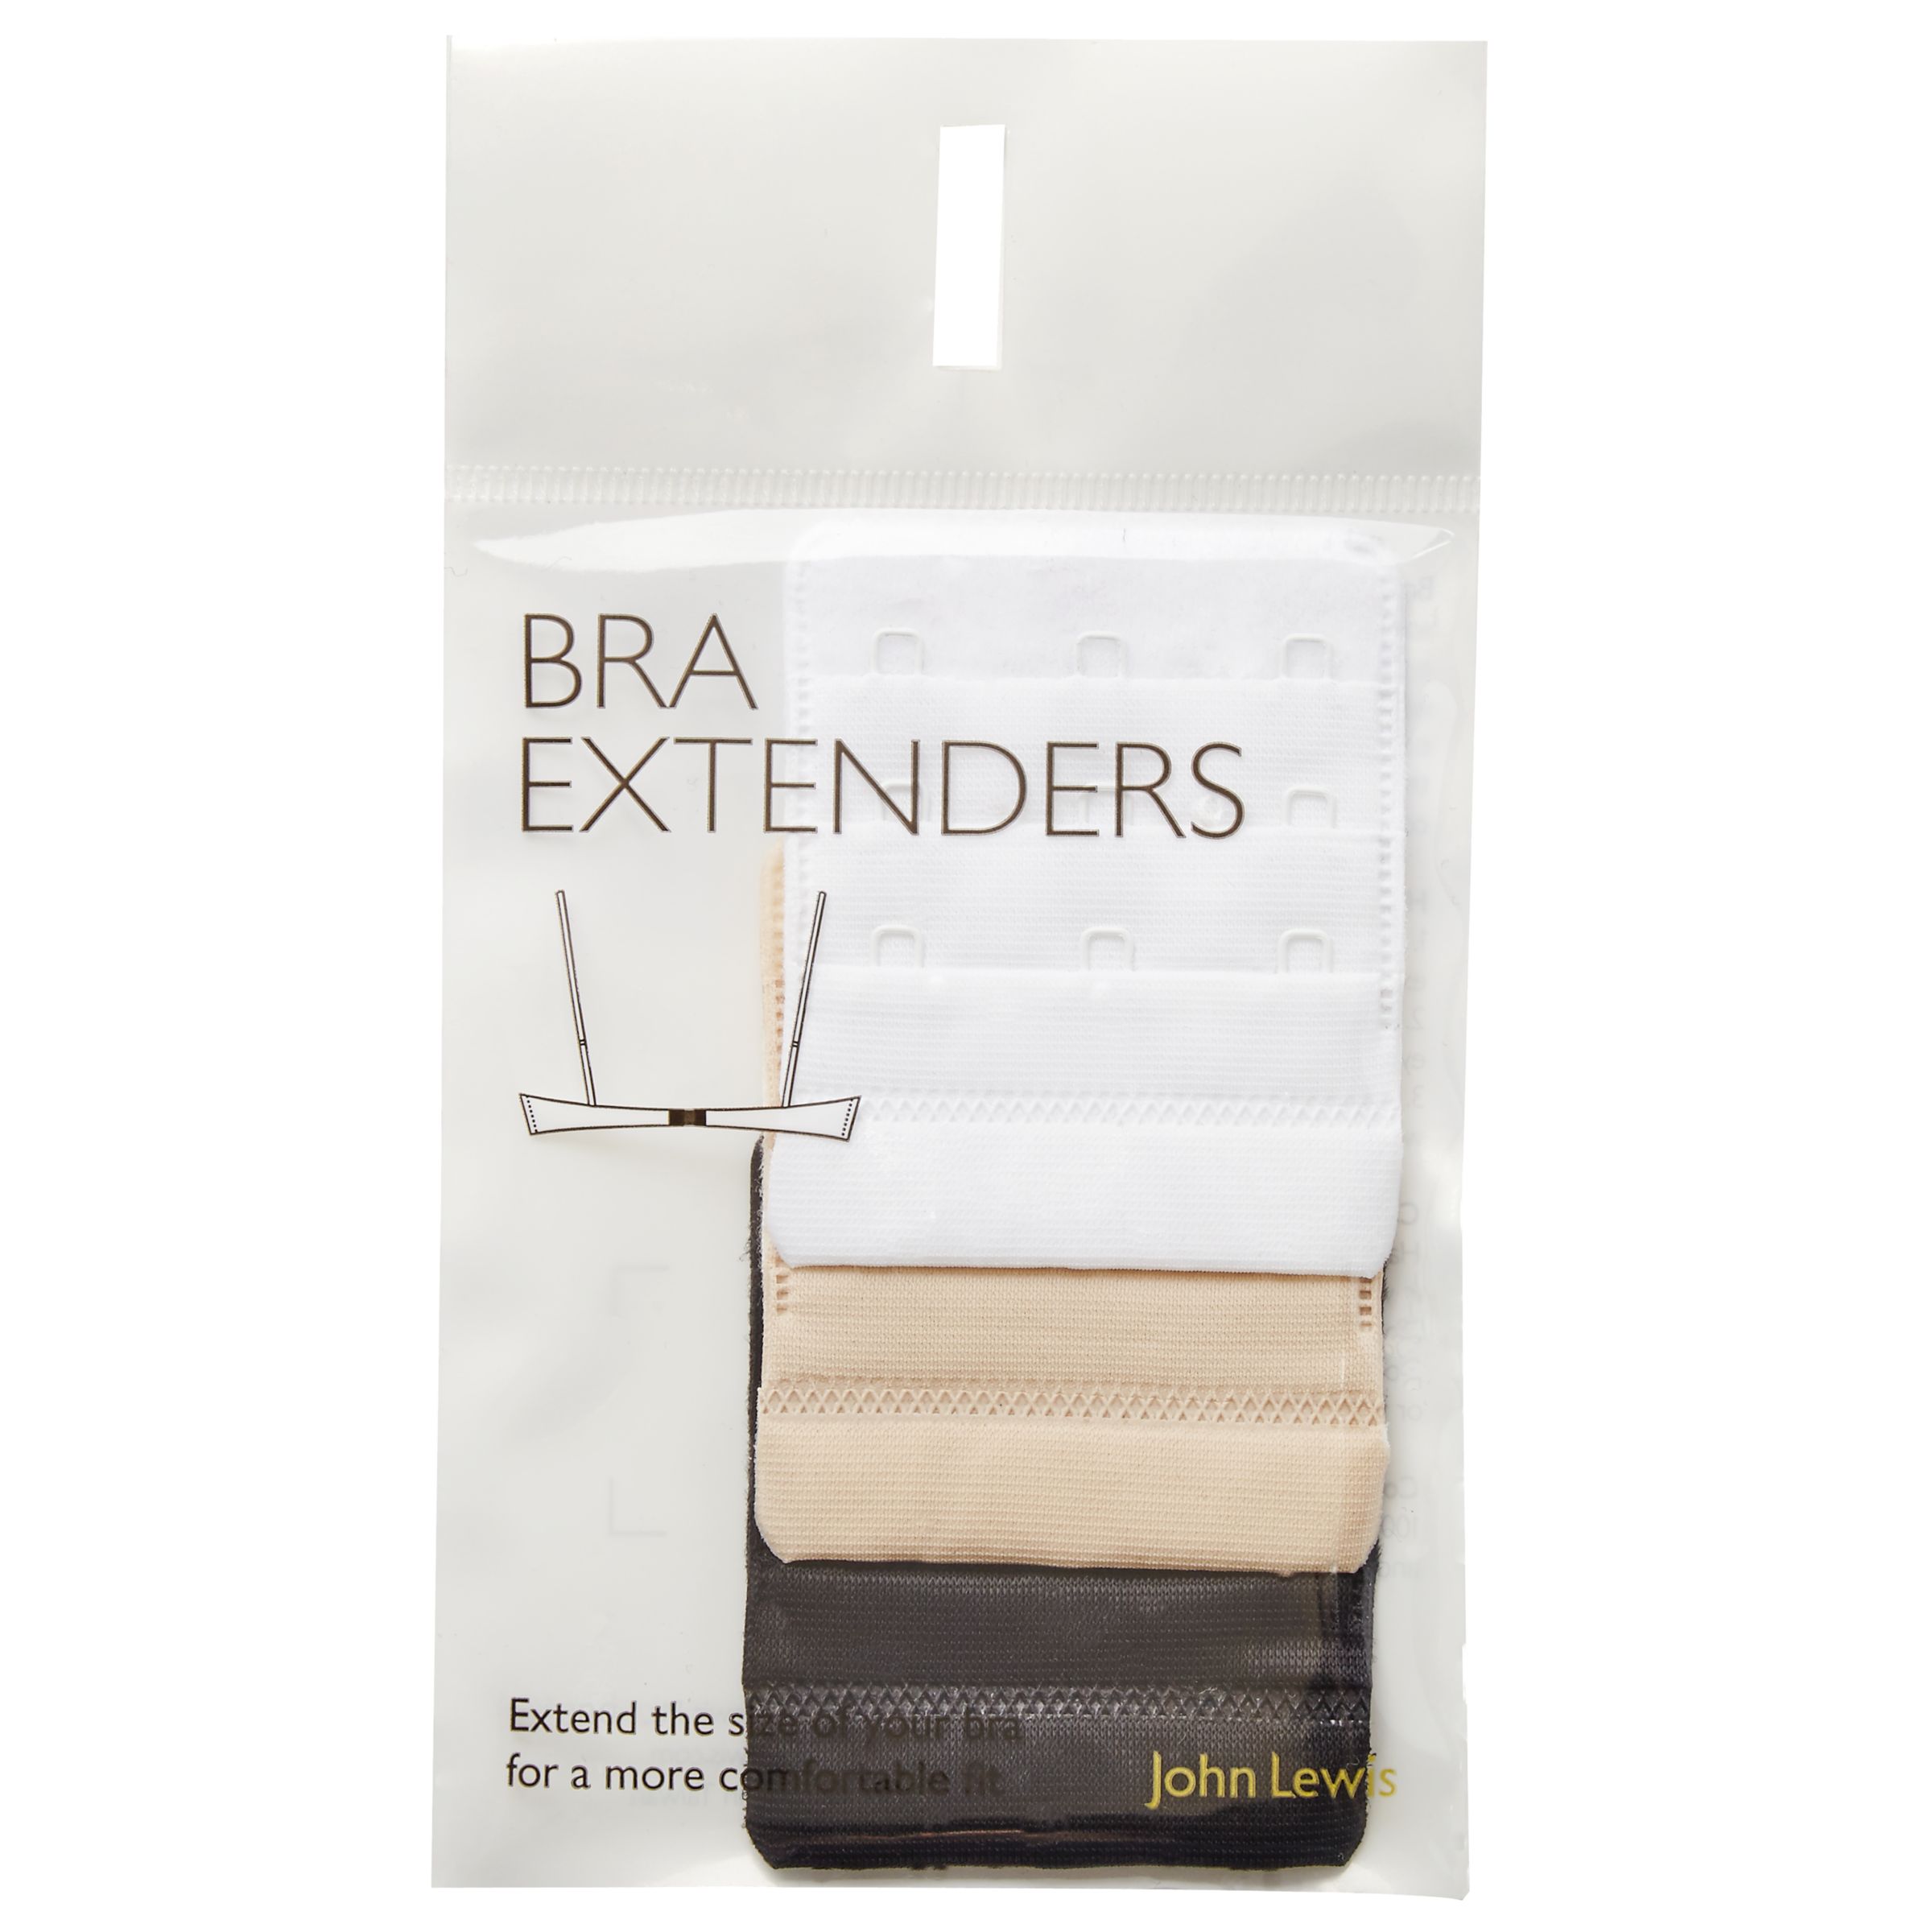 Perfection 1 Hook Bra Extenders For Tight Fitting Bras - 3 Pack  Black/White/Nude